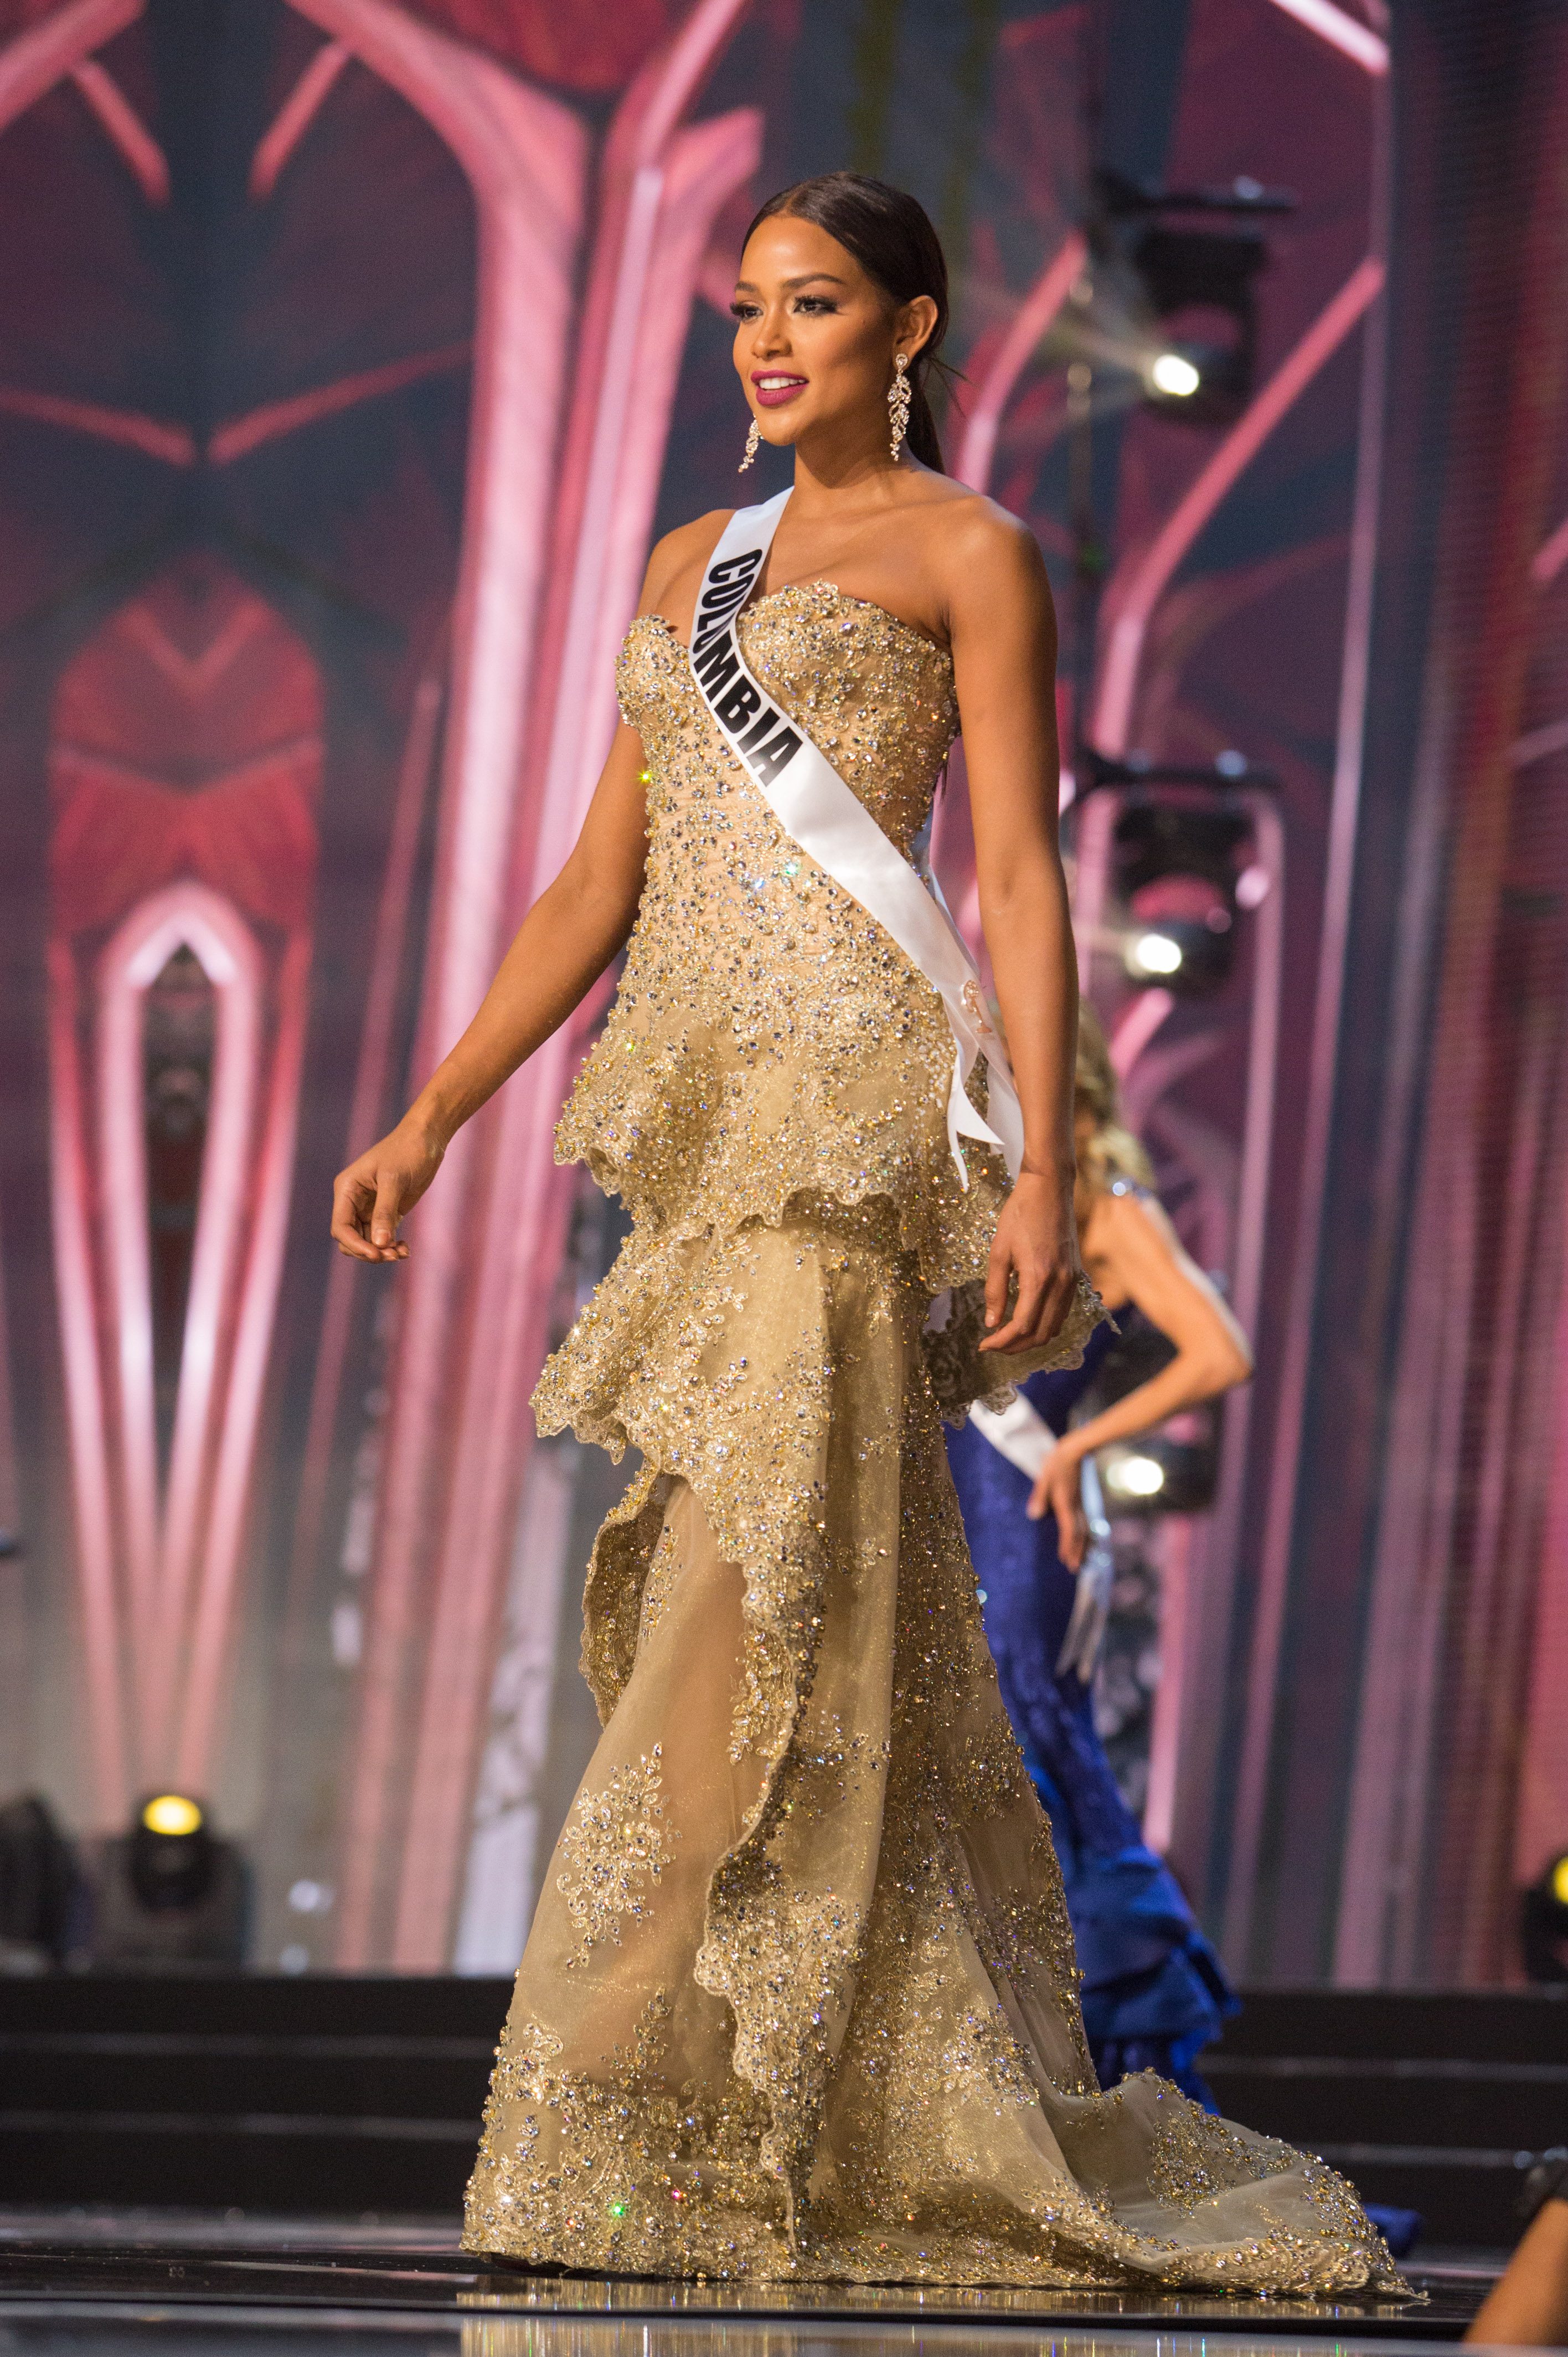 Andrea Tovar, Miss Colombia 2016 competes on stage in her evening gown during the 65th MISS UNIVERSE Preliminary Competition at the Mall of Asia Arena on Thursday, January 26, 2017. Phot from HO/The Miss Universe Organization 